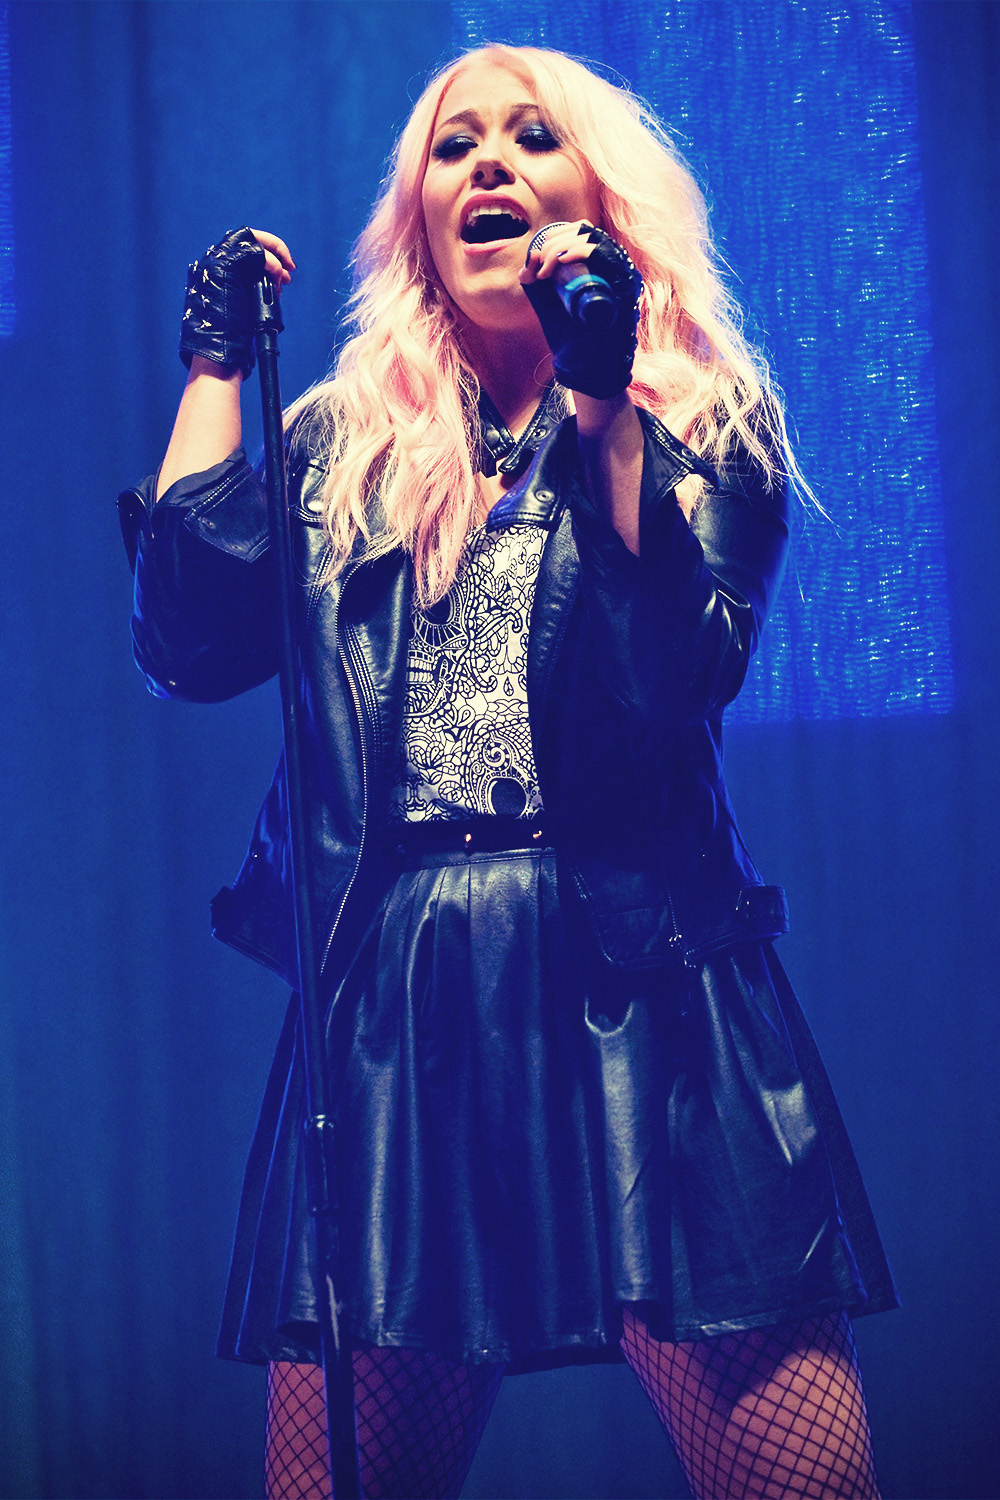 Amelia Lily attends Clyde 1 Live 2012